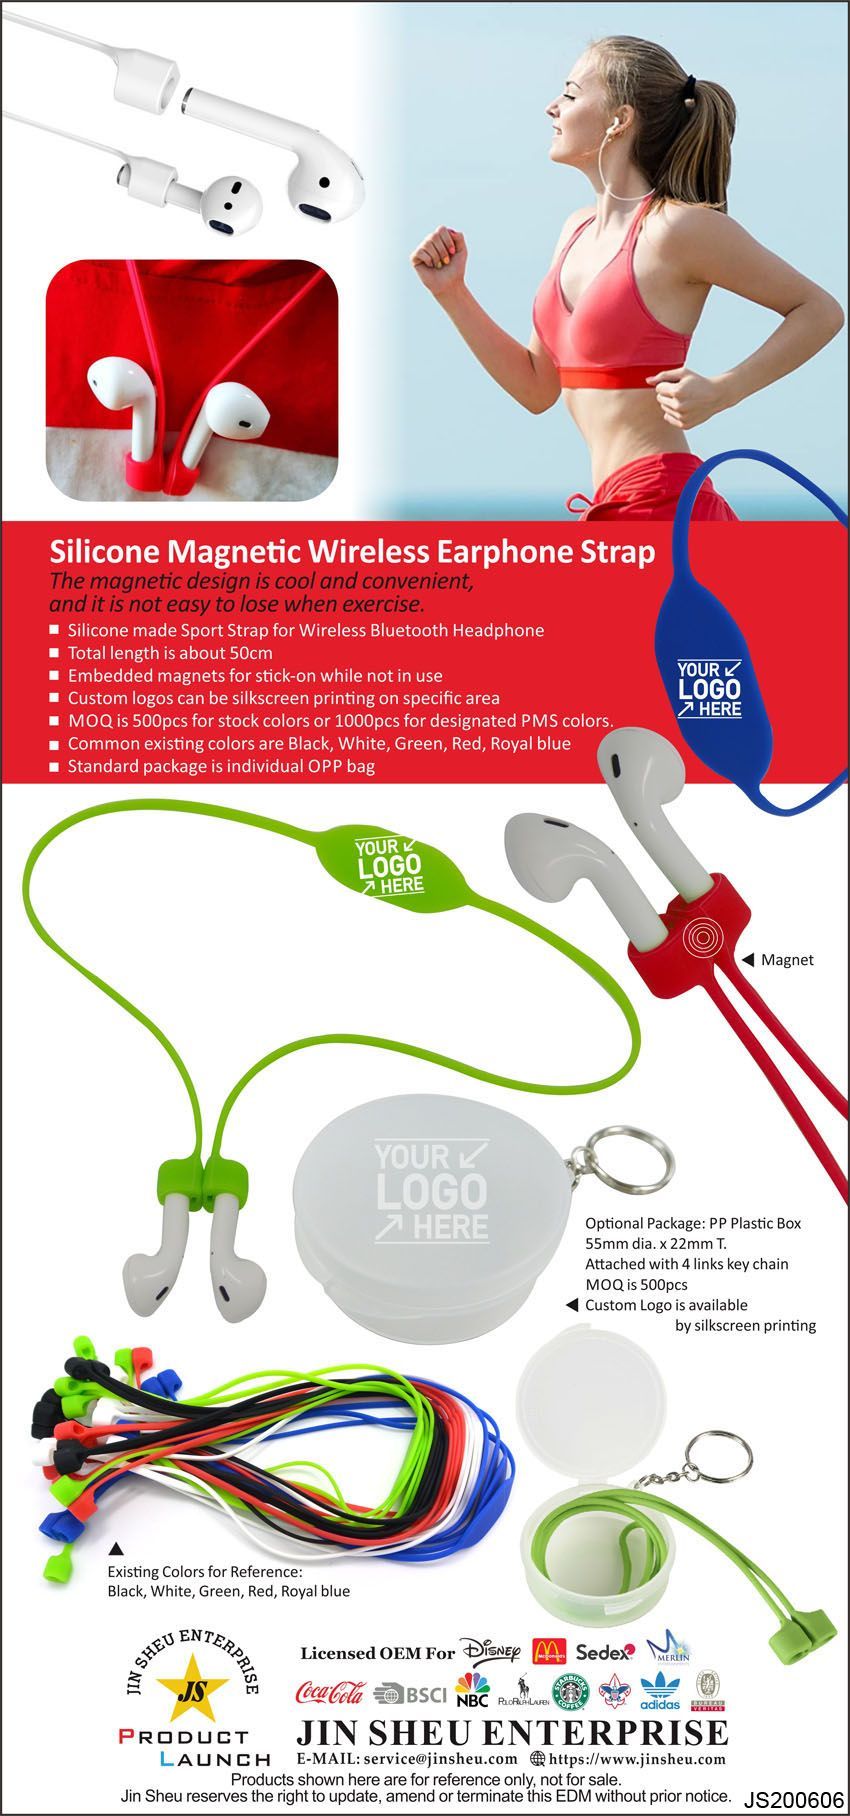 Silicone Magnetic Wireless Earphone Strap